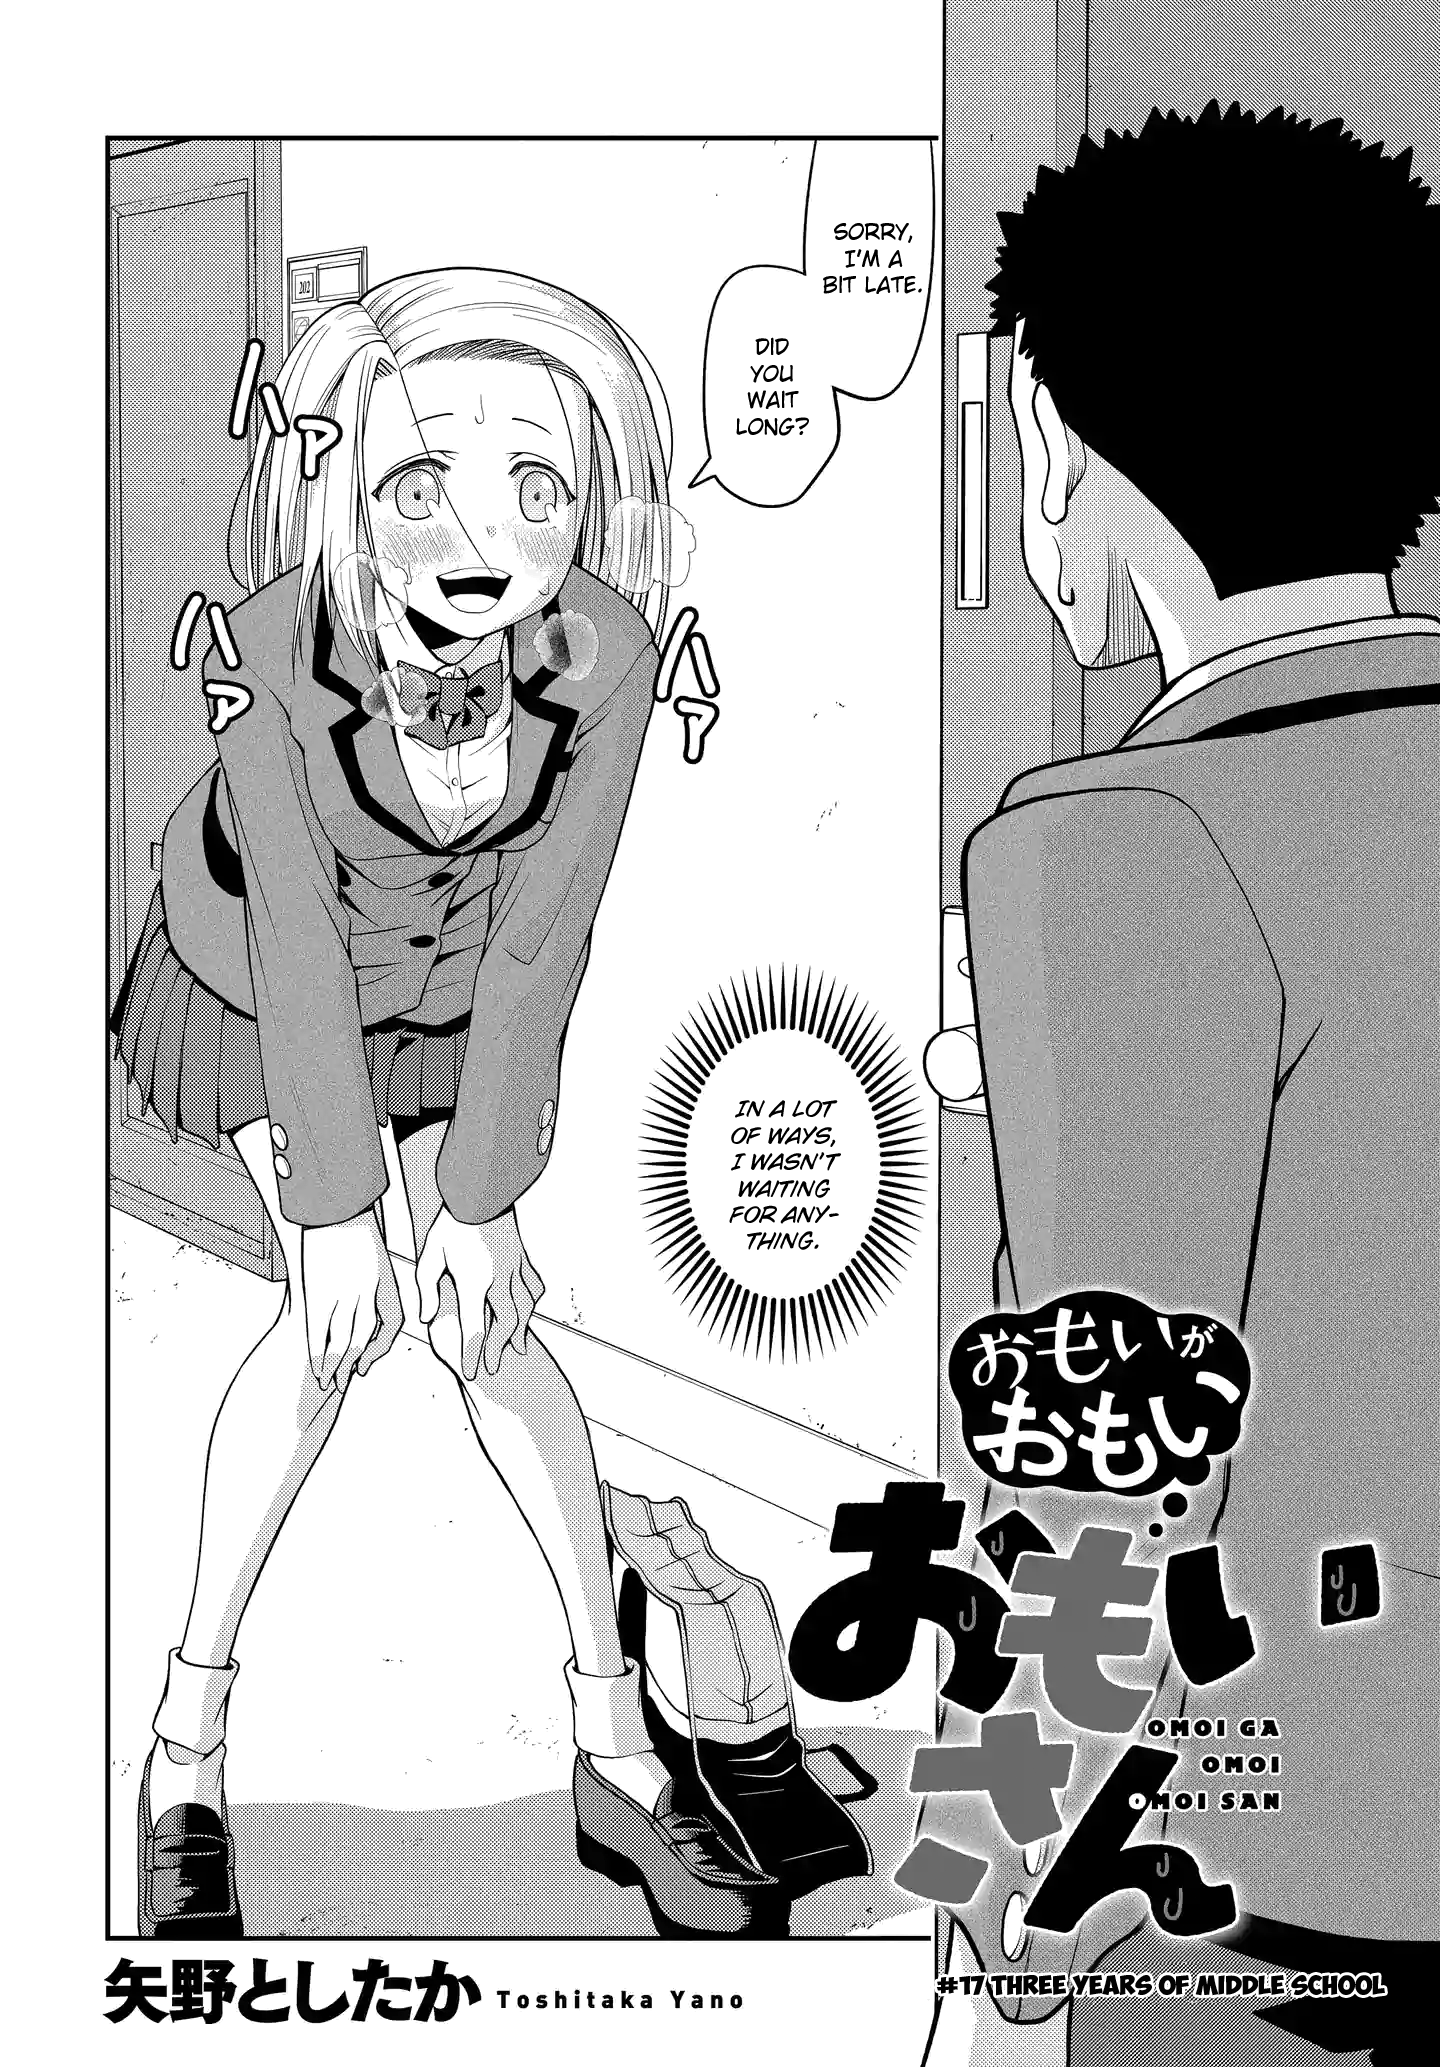 Omoi Ga Omoi Omoi-San Vol.1 Chapter 17: Three Years Of Middle School - Picture 2